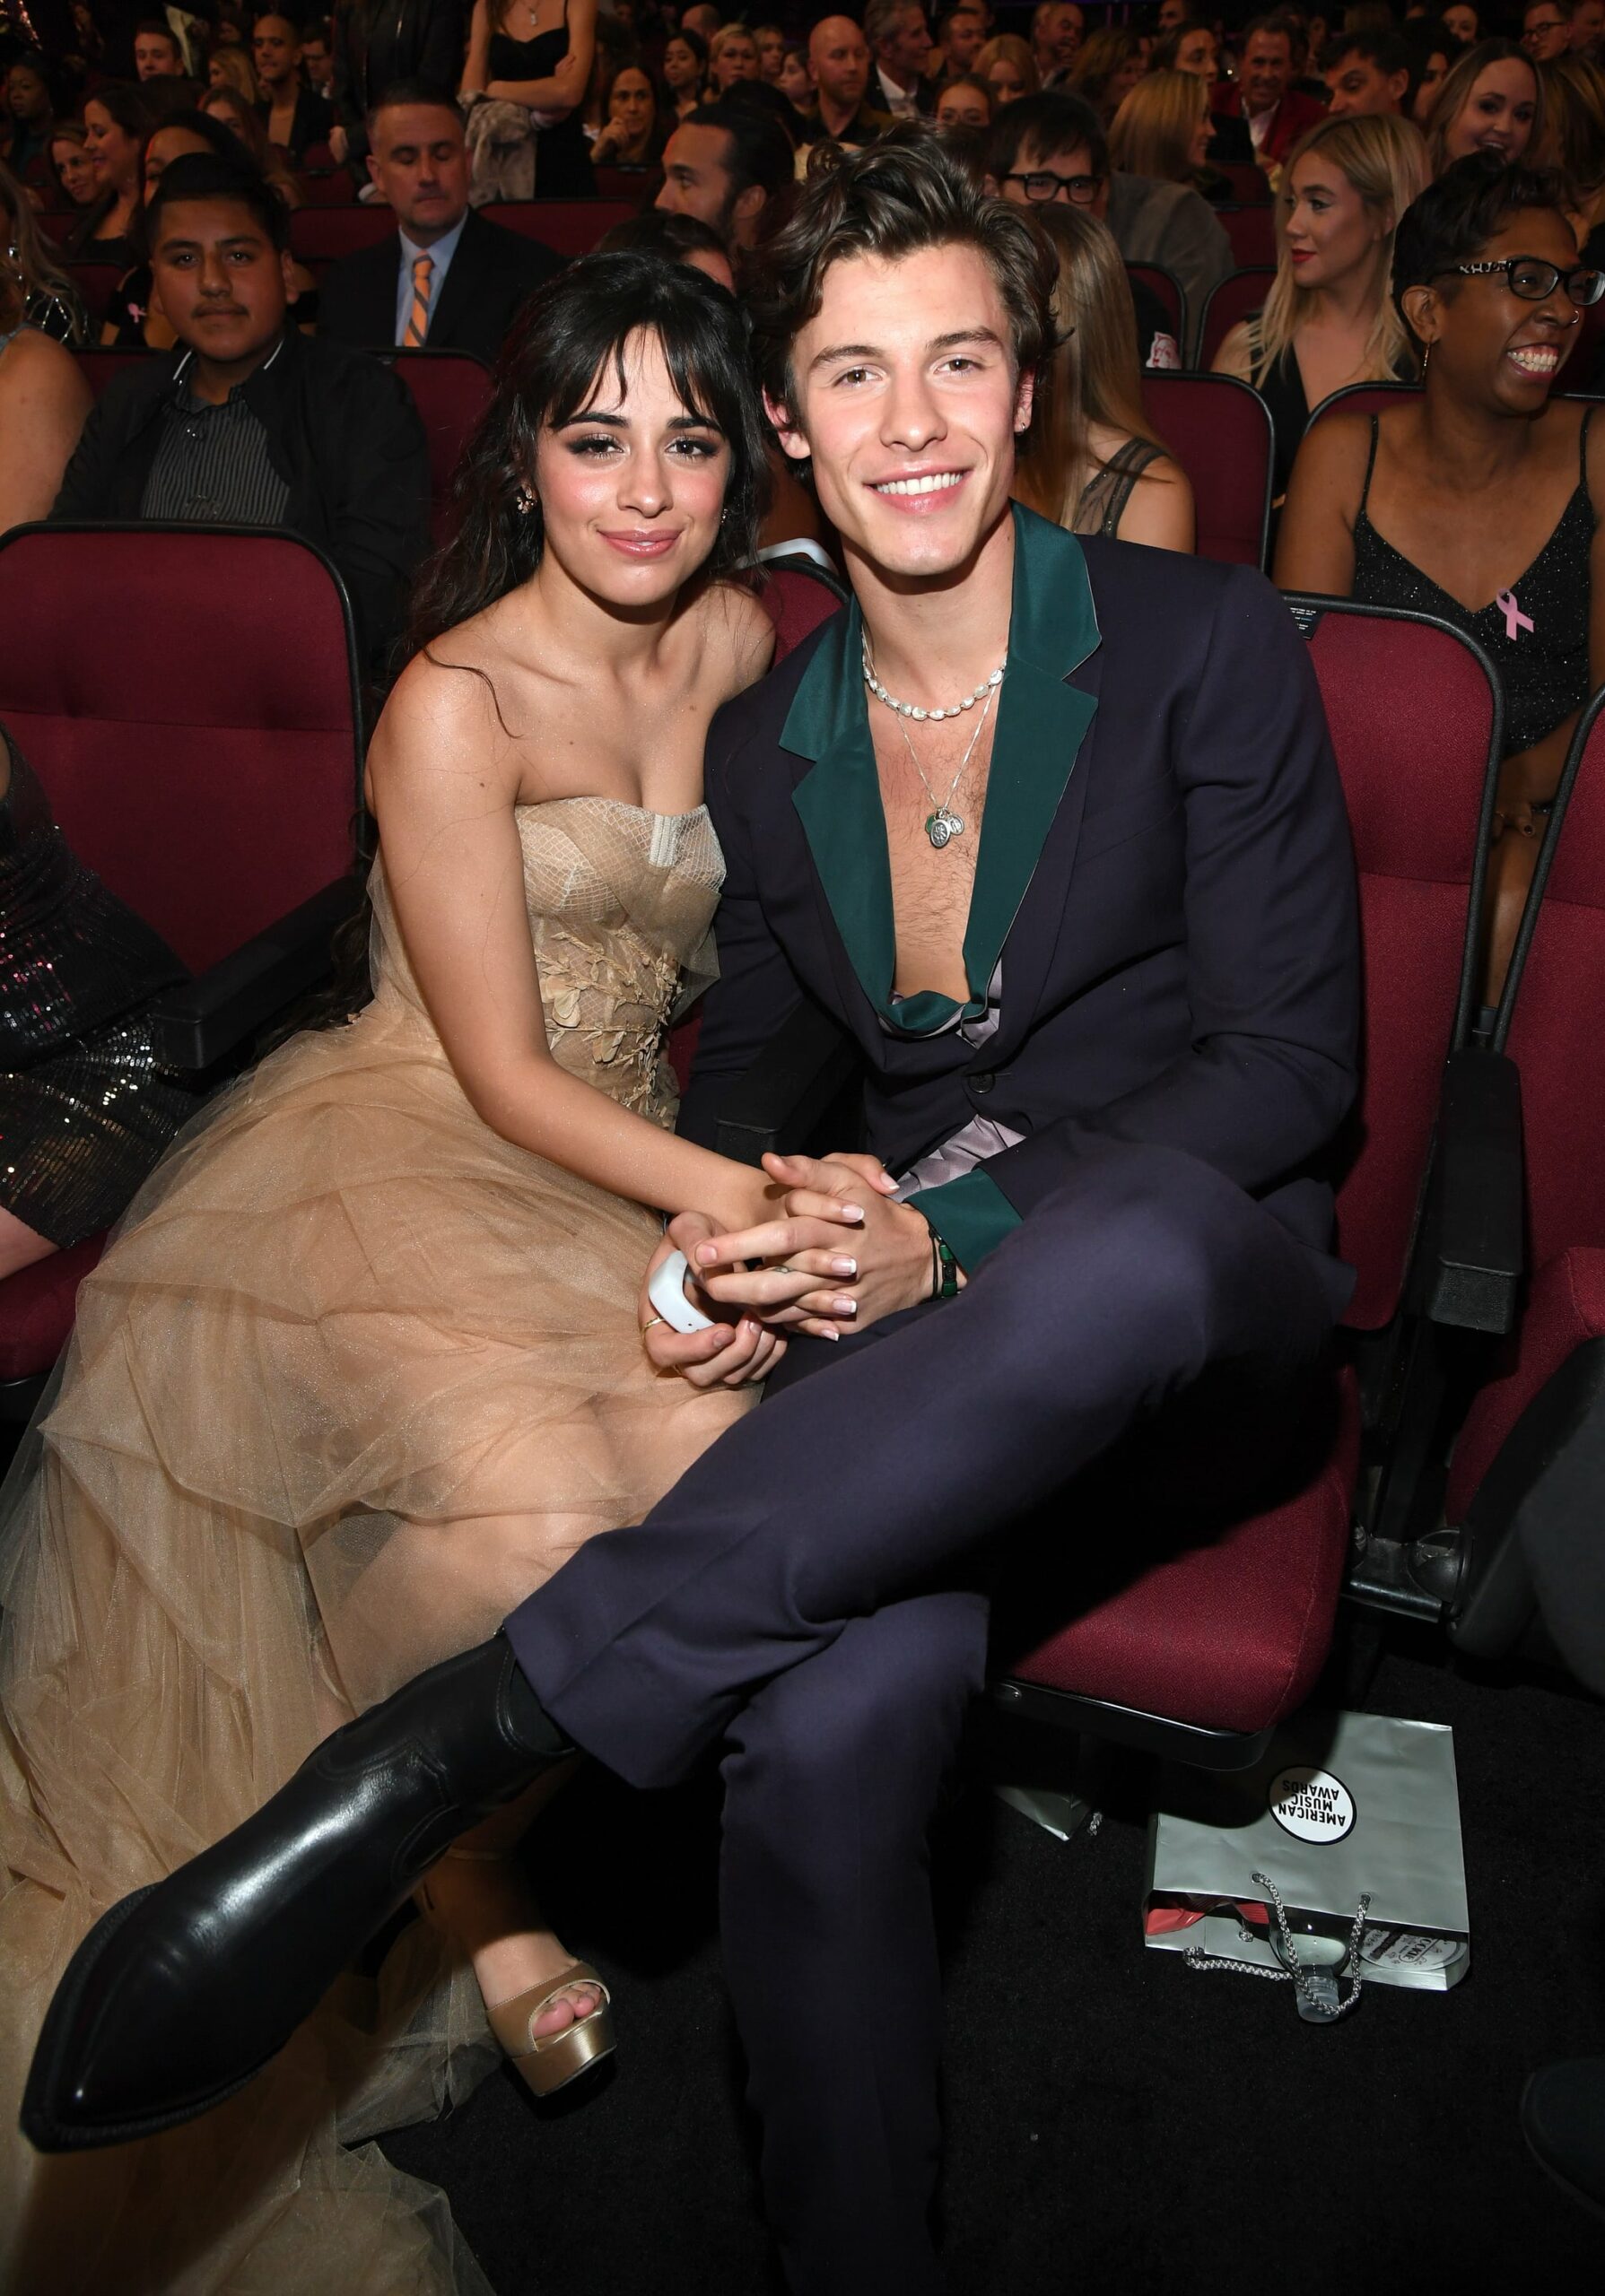 LOS ANGELES, CALIFORNIA - NOVEMBER 24: Camila Cabello and Shawn Mendes attend the 2019 American Music Awards at Microsoft Theater on November 24, 2019 in Los Angeles, California. (Photo by Kevin Mazur/AMA2019/Getty Images for dcp)